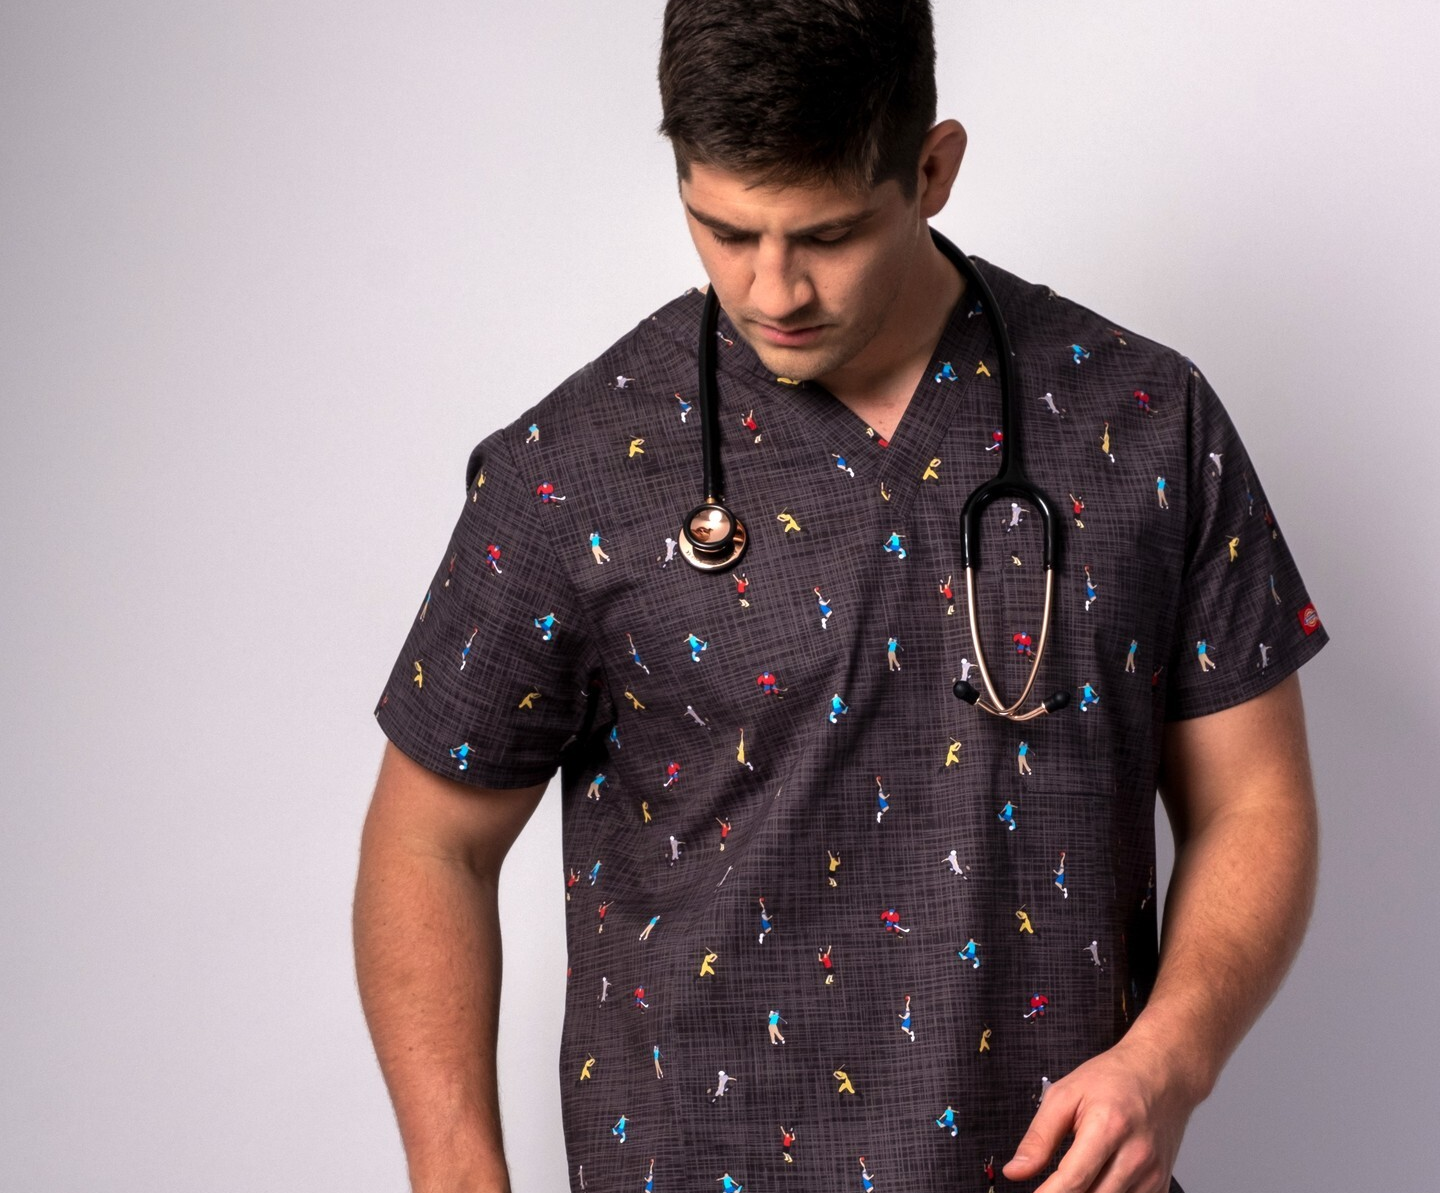 Clinical Uniforms for the health sector